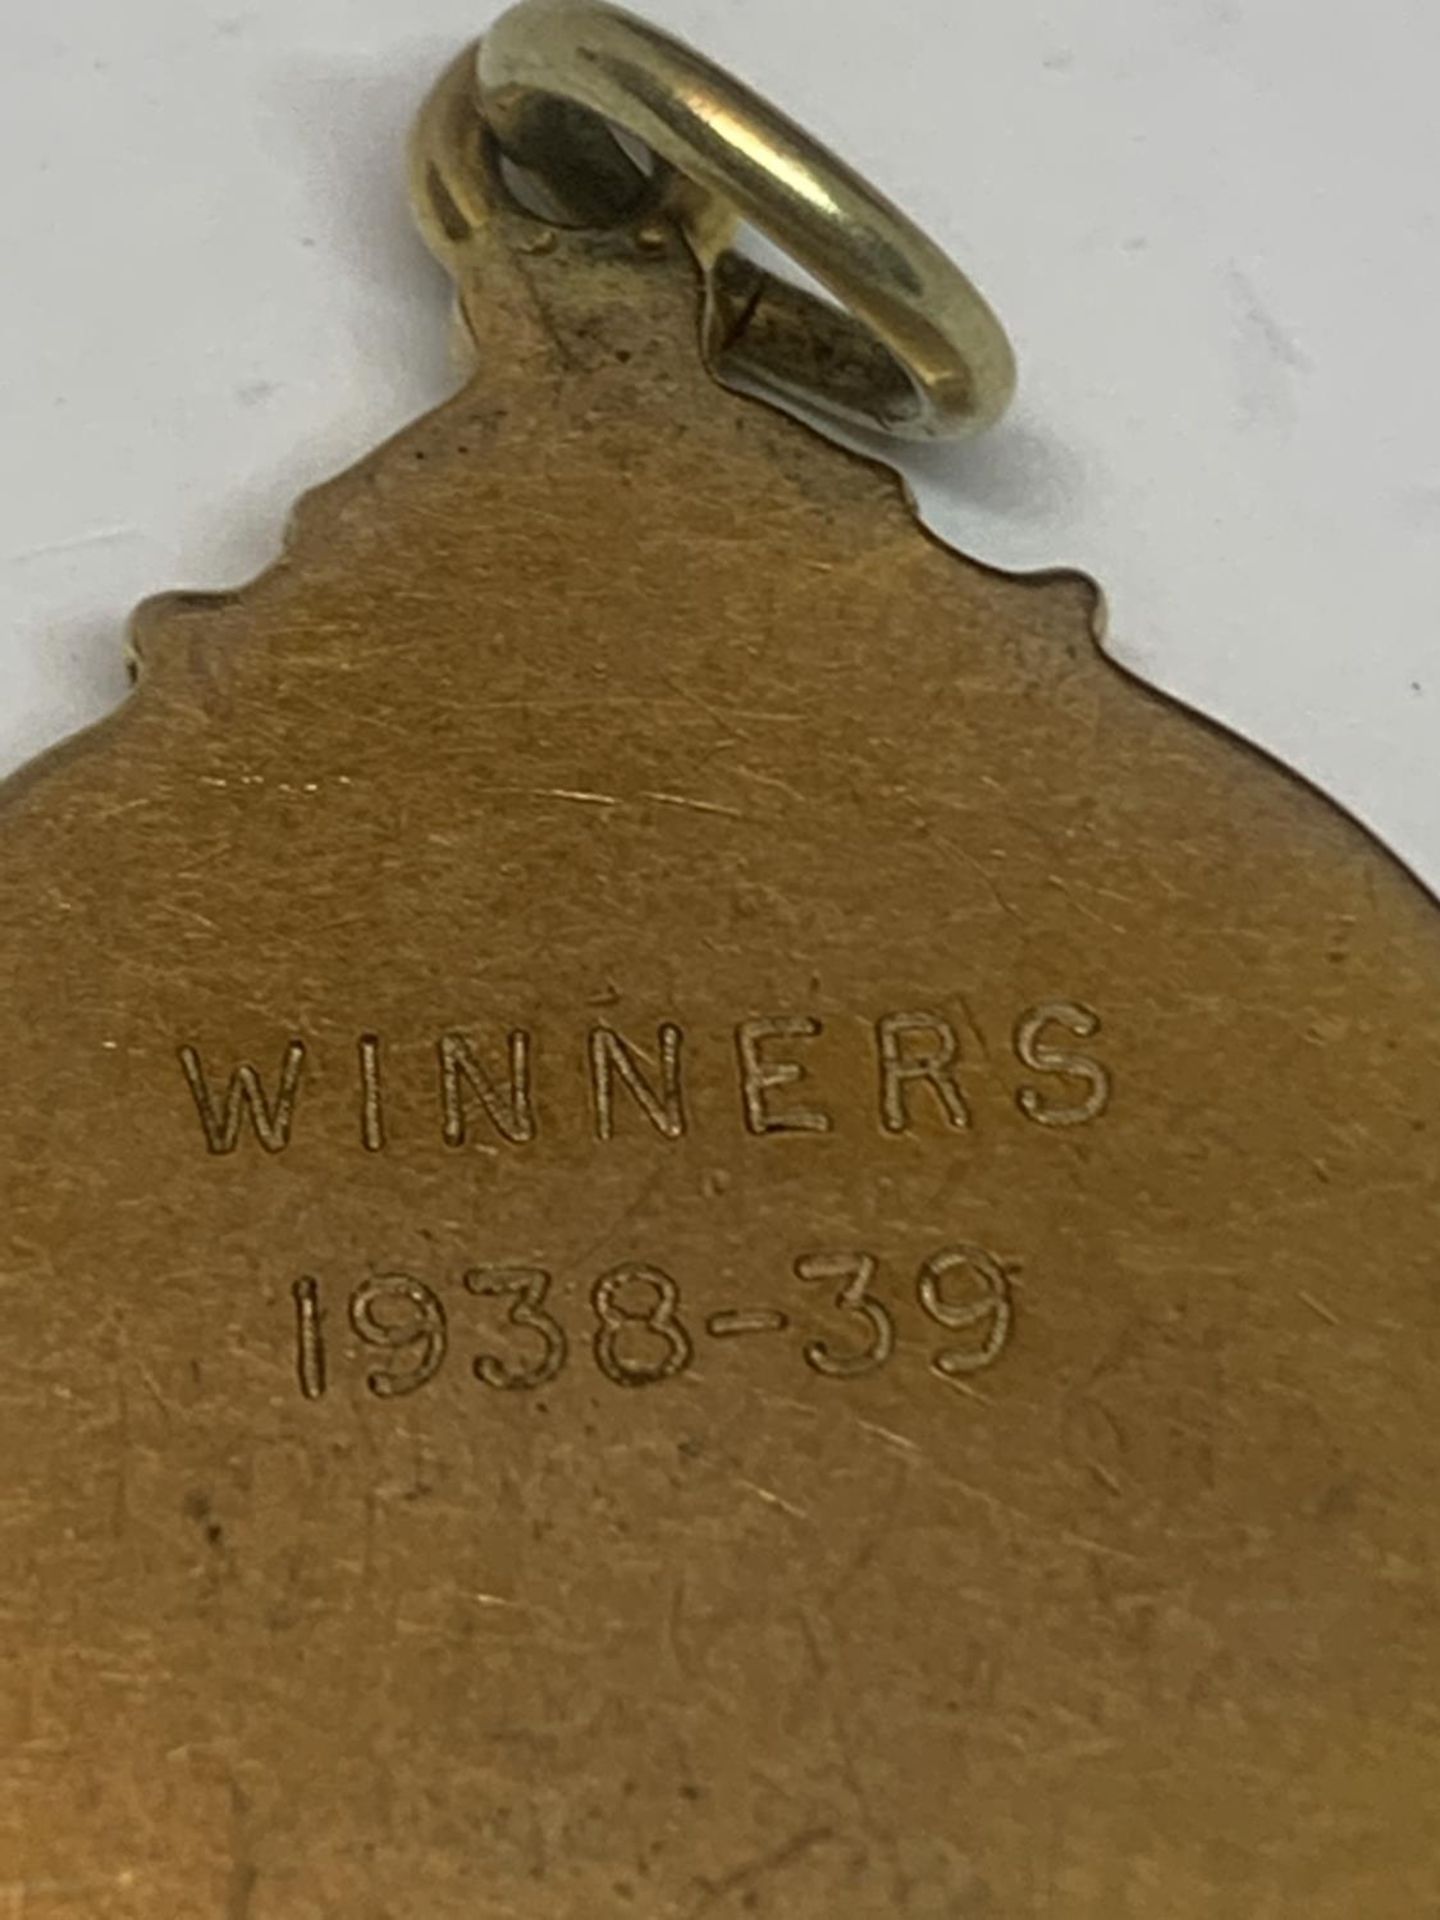 A HALLMARKED 9 CARAT GOLD NORTHERN RUGBY LEAGUE FOOTBALL MEDAL ENGRAVED WINNERS 1938-39 GROSS WEIGHT - Image 3 of 5